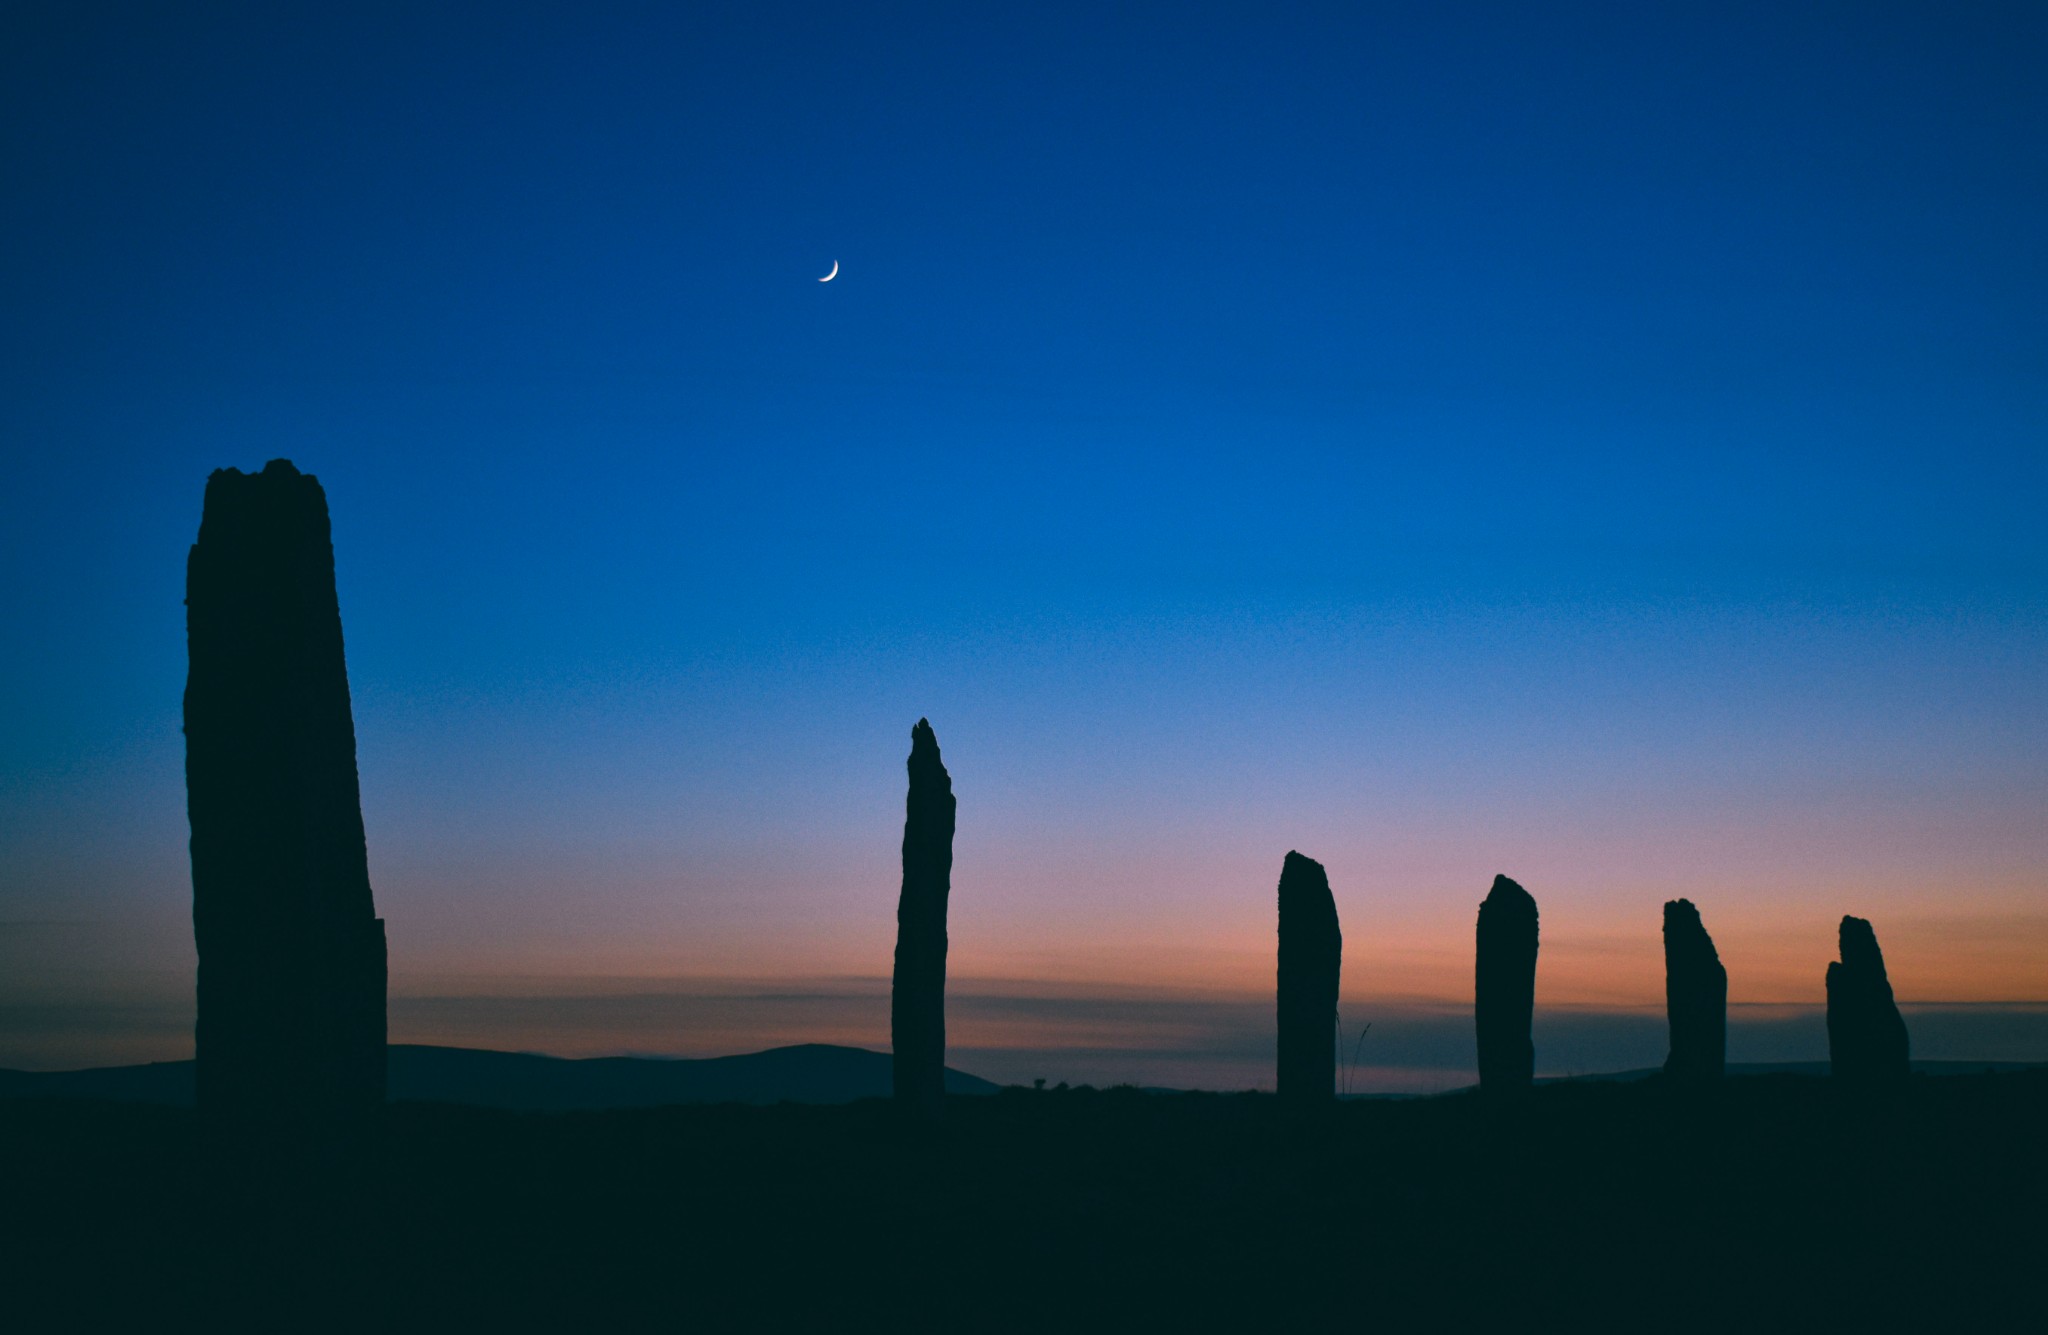 Ring of Brodgar, Orkney - image by Vicky Fee